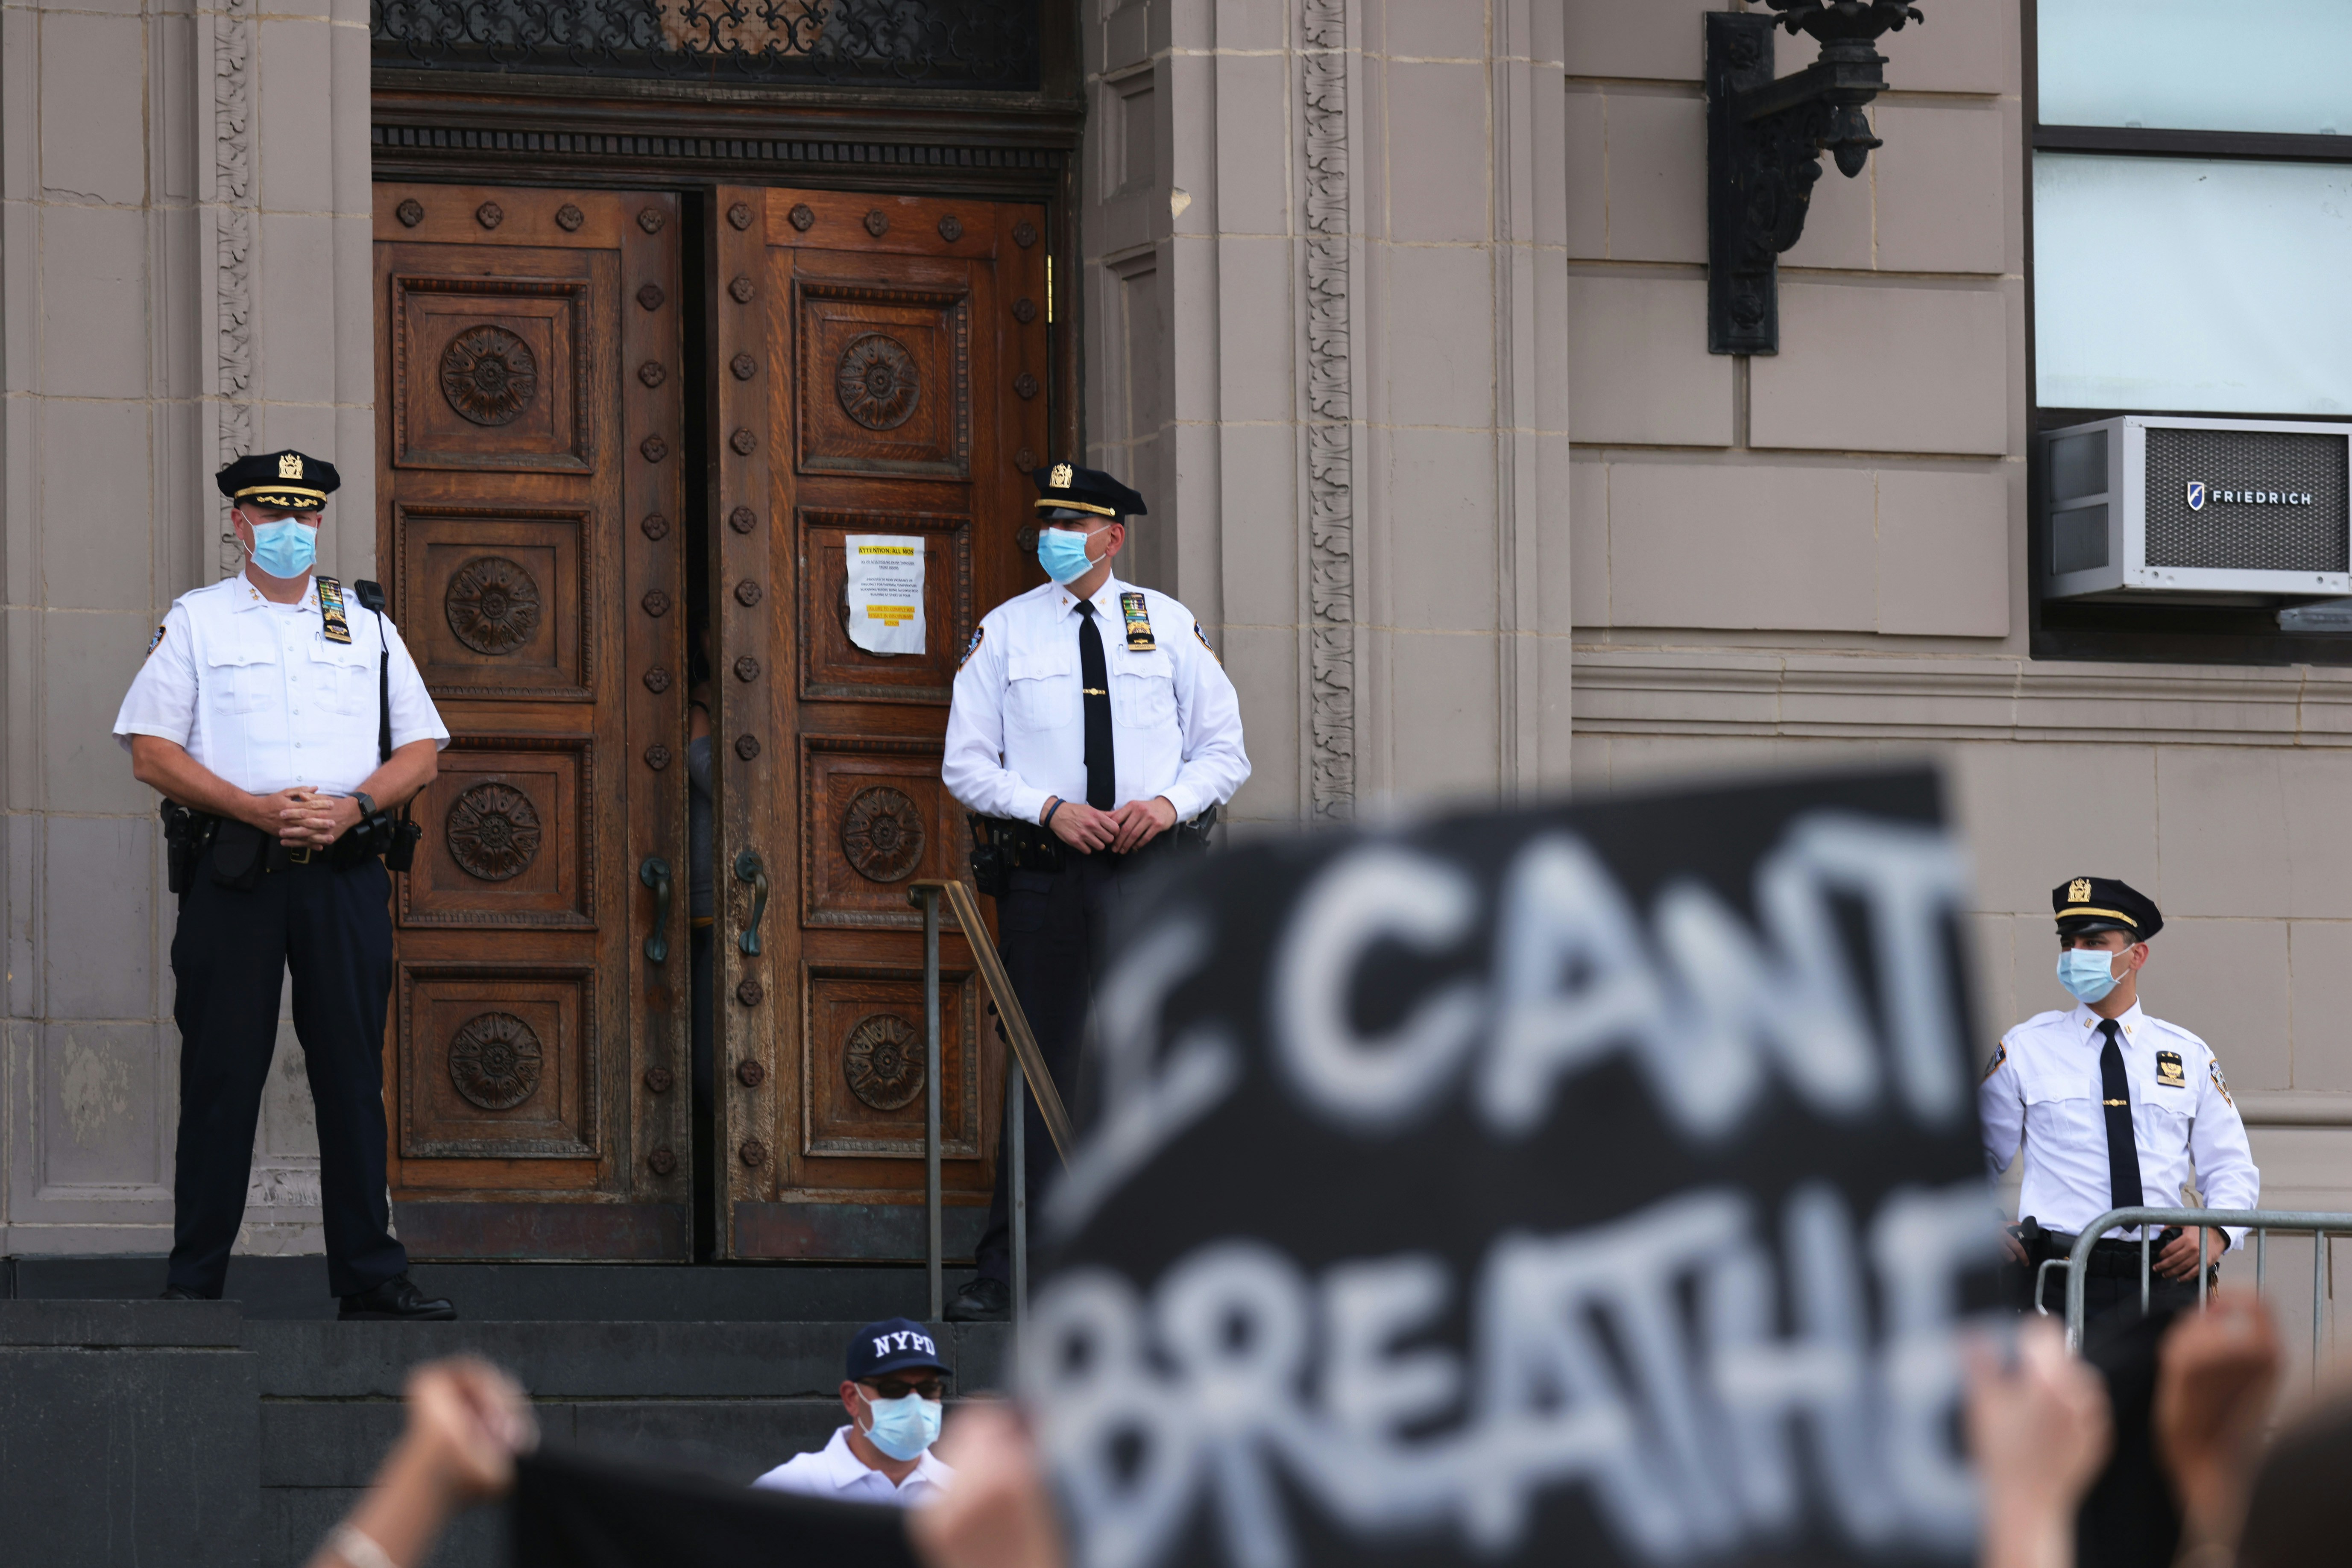 NEW YORK, NEW YORK - JULY 17: Police officers stand guard as protesters gather in front of the 120th NYPD precinct on the sixth anniversary of Eric Garner's death in Tompkinsville, Staten Island on July 17, 2020 in New York City. Garner was killed after being placed in a chokehold by former New York City Police officer Daniel Pantaleo during an arrest in 2014. (Photo by Michael M. Santiago/Getty Images)